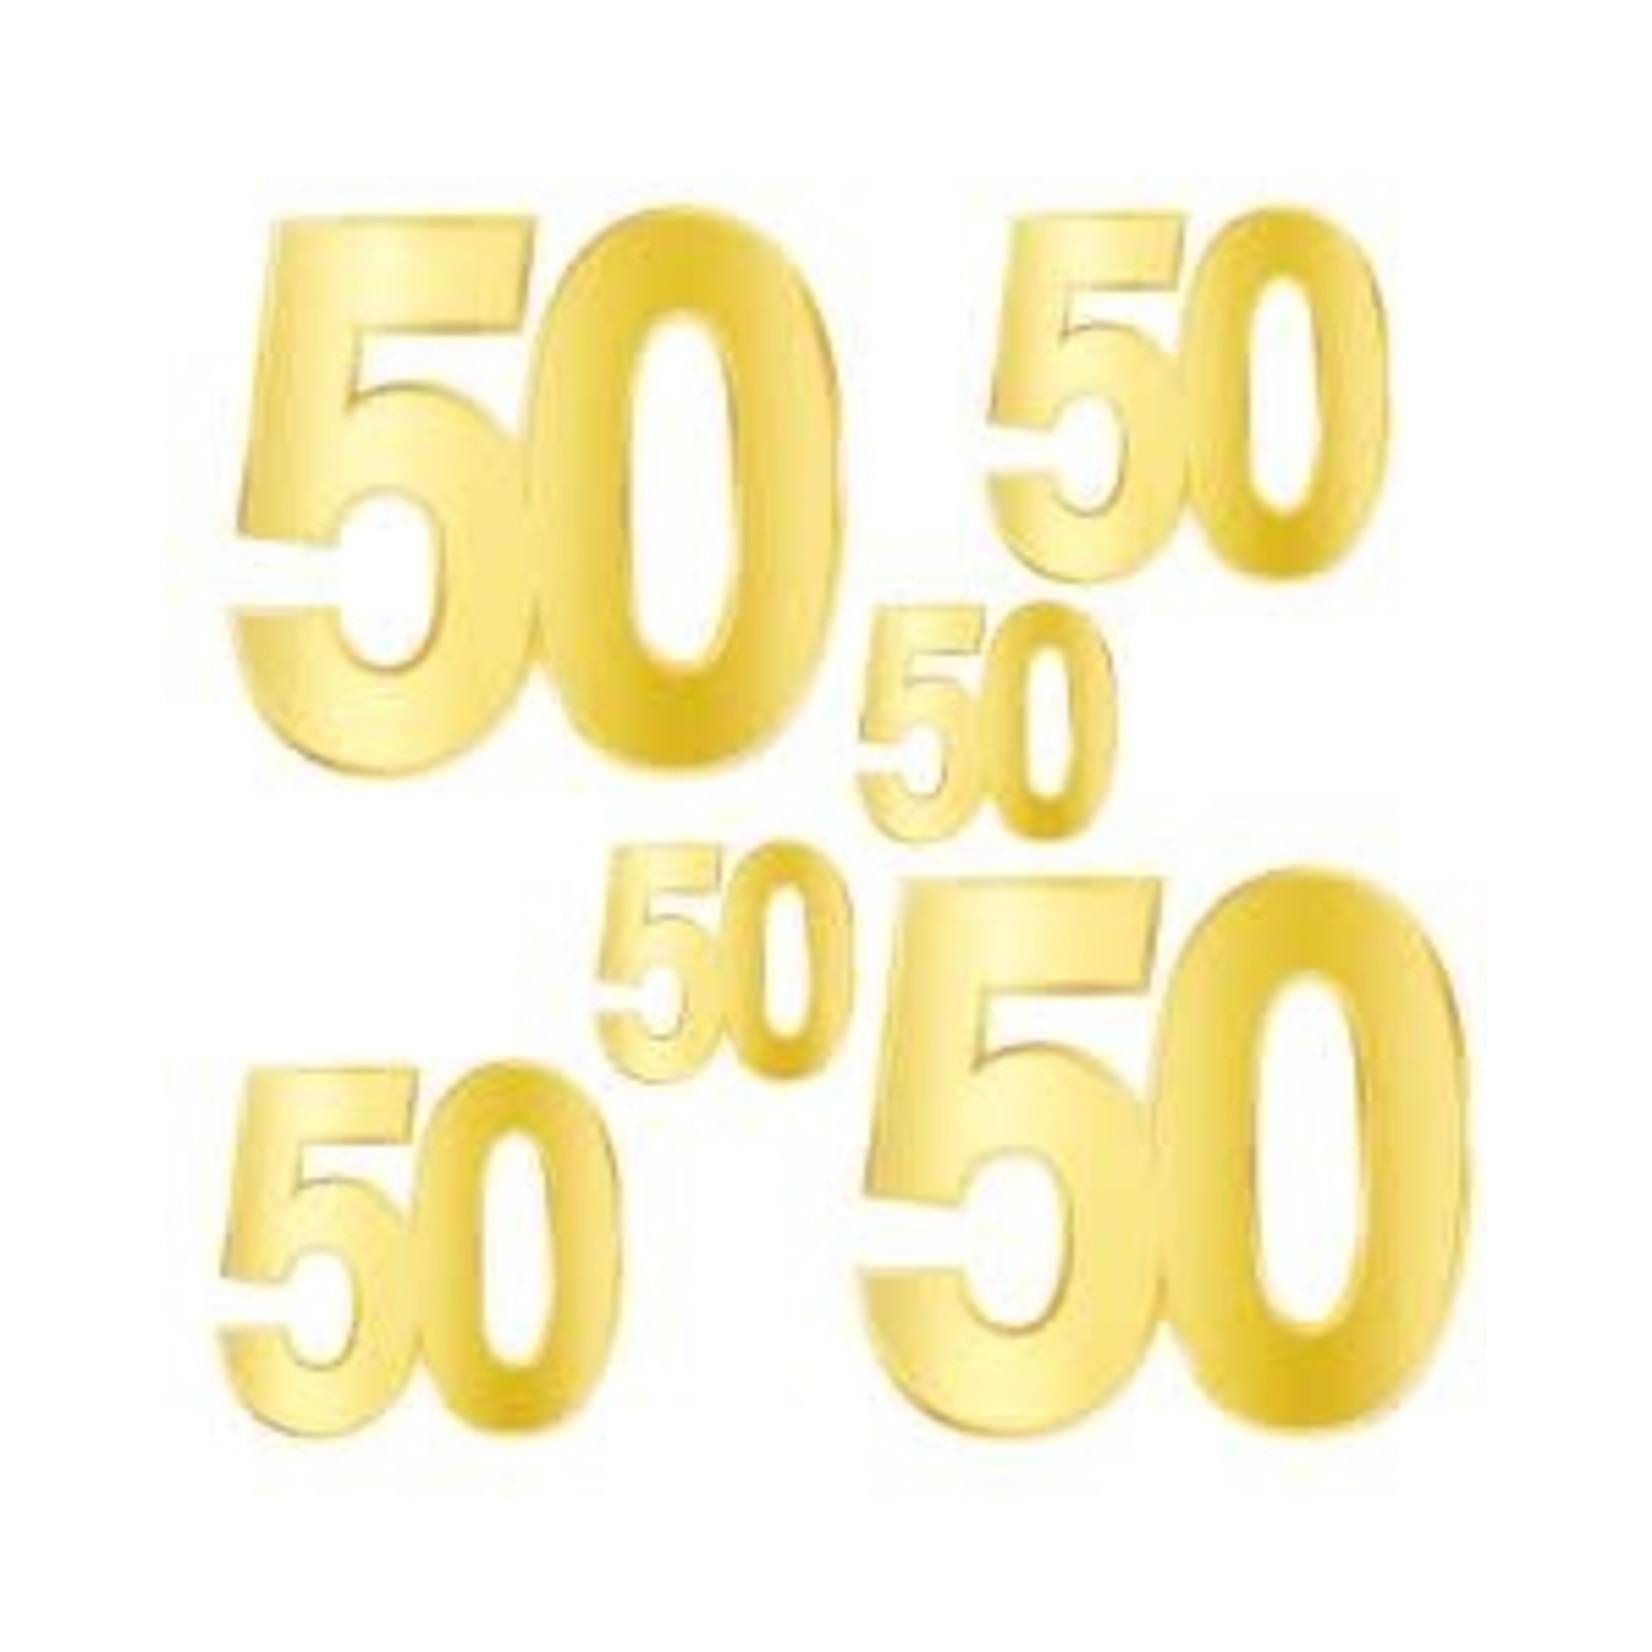 Beistle 50th Birthday Gold Foil Cutouts - 6ct.